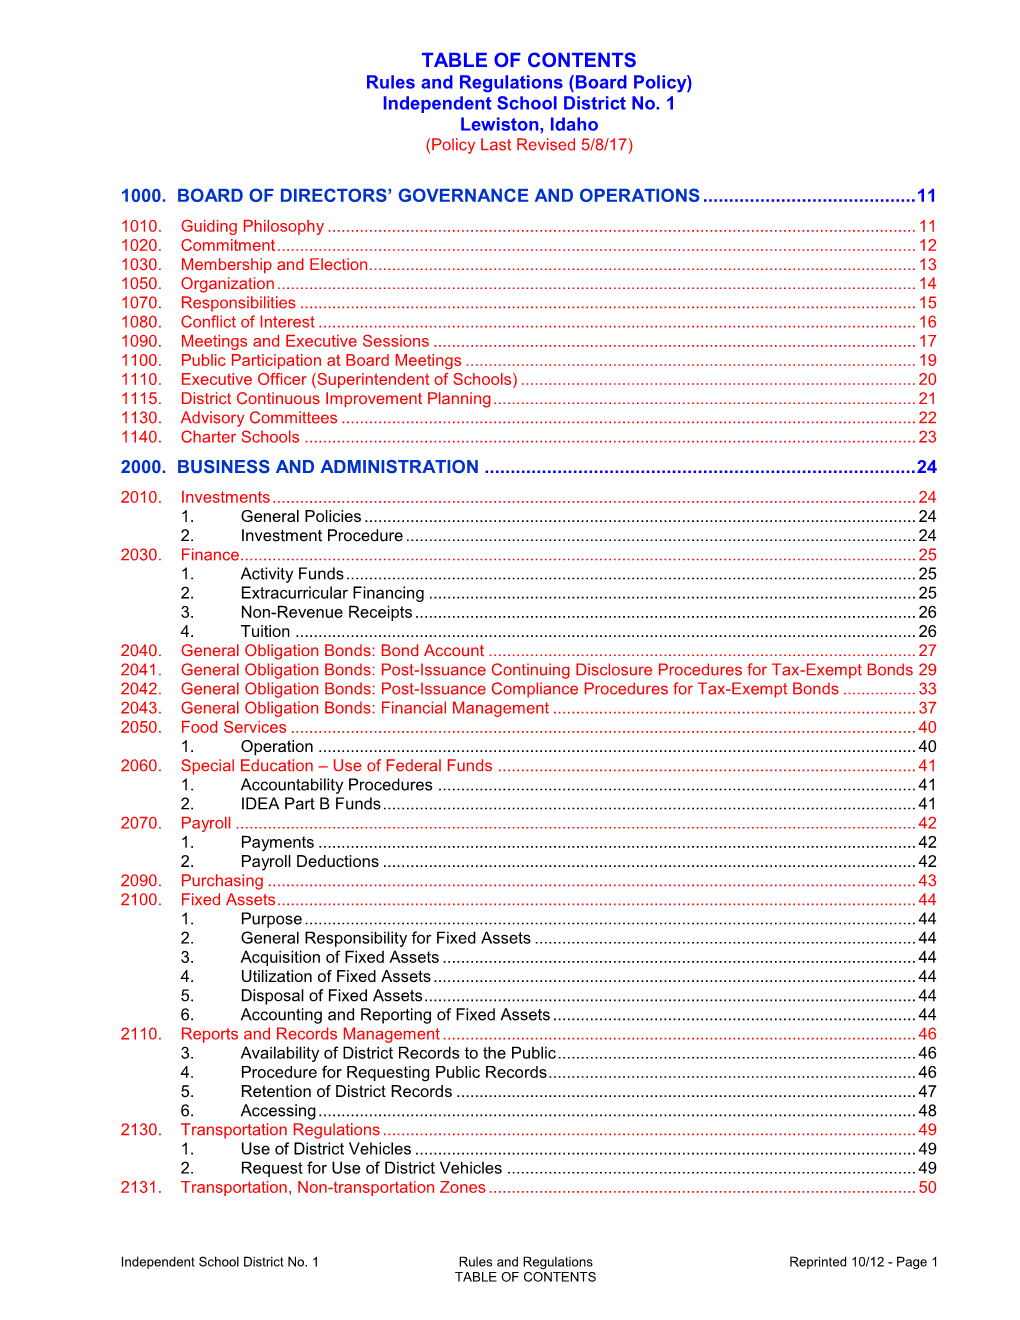 TABLE of CONTENTS Rules and Regulations (Board Policy) Independent School District No